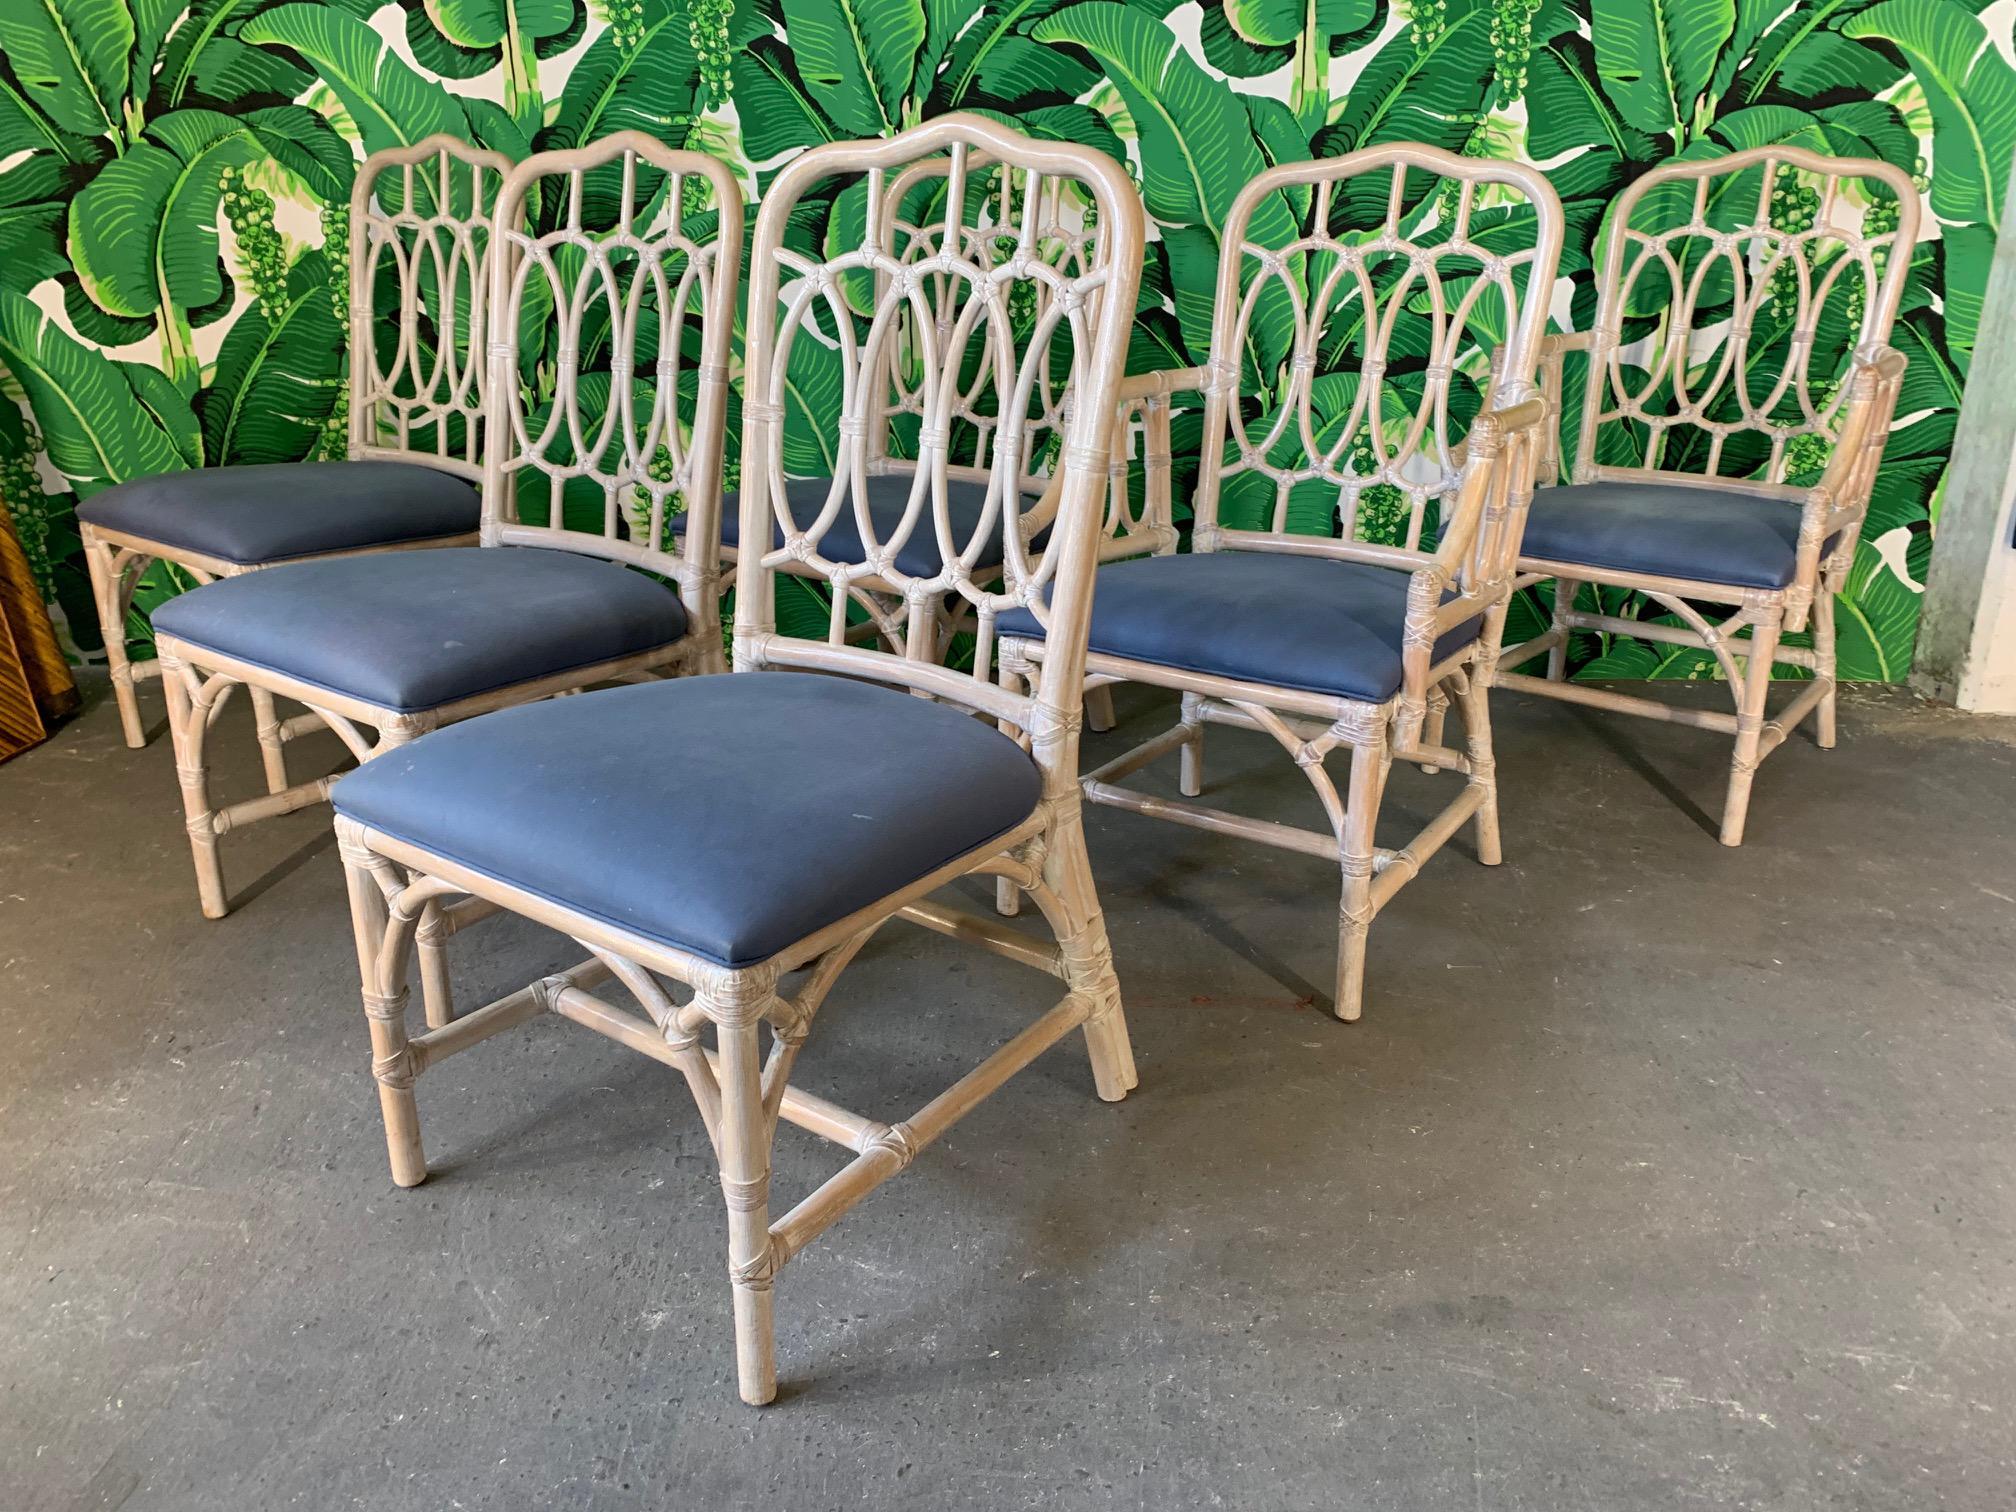 Set of 6 rattan dining chairs by Lexington feature loop back styling and solid construction. Very good condition with minimal imperfections other than cushions which are slightly stained.